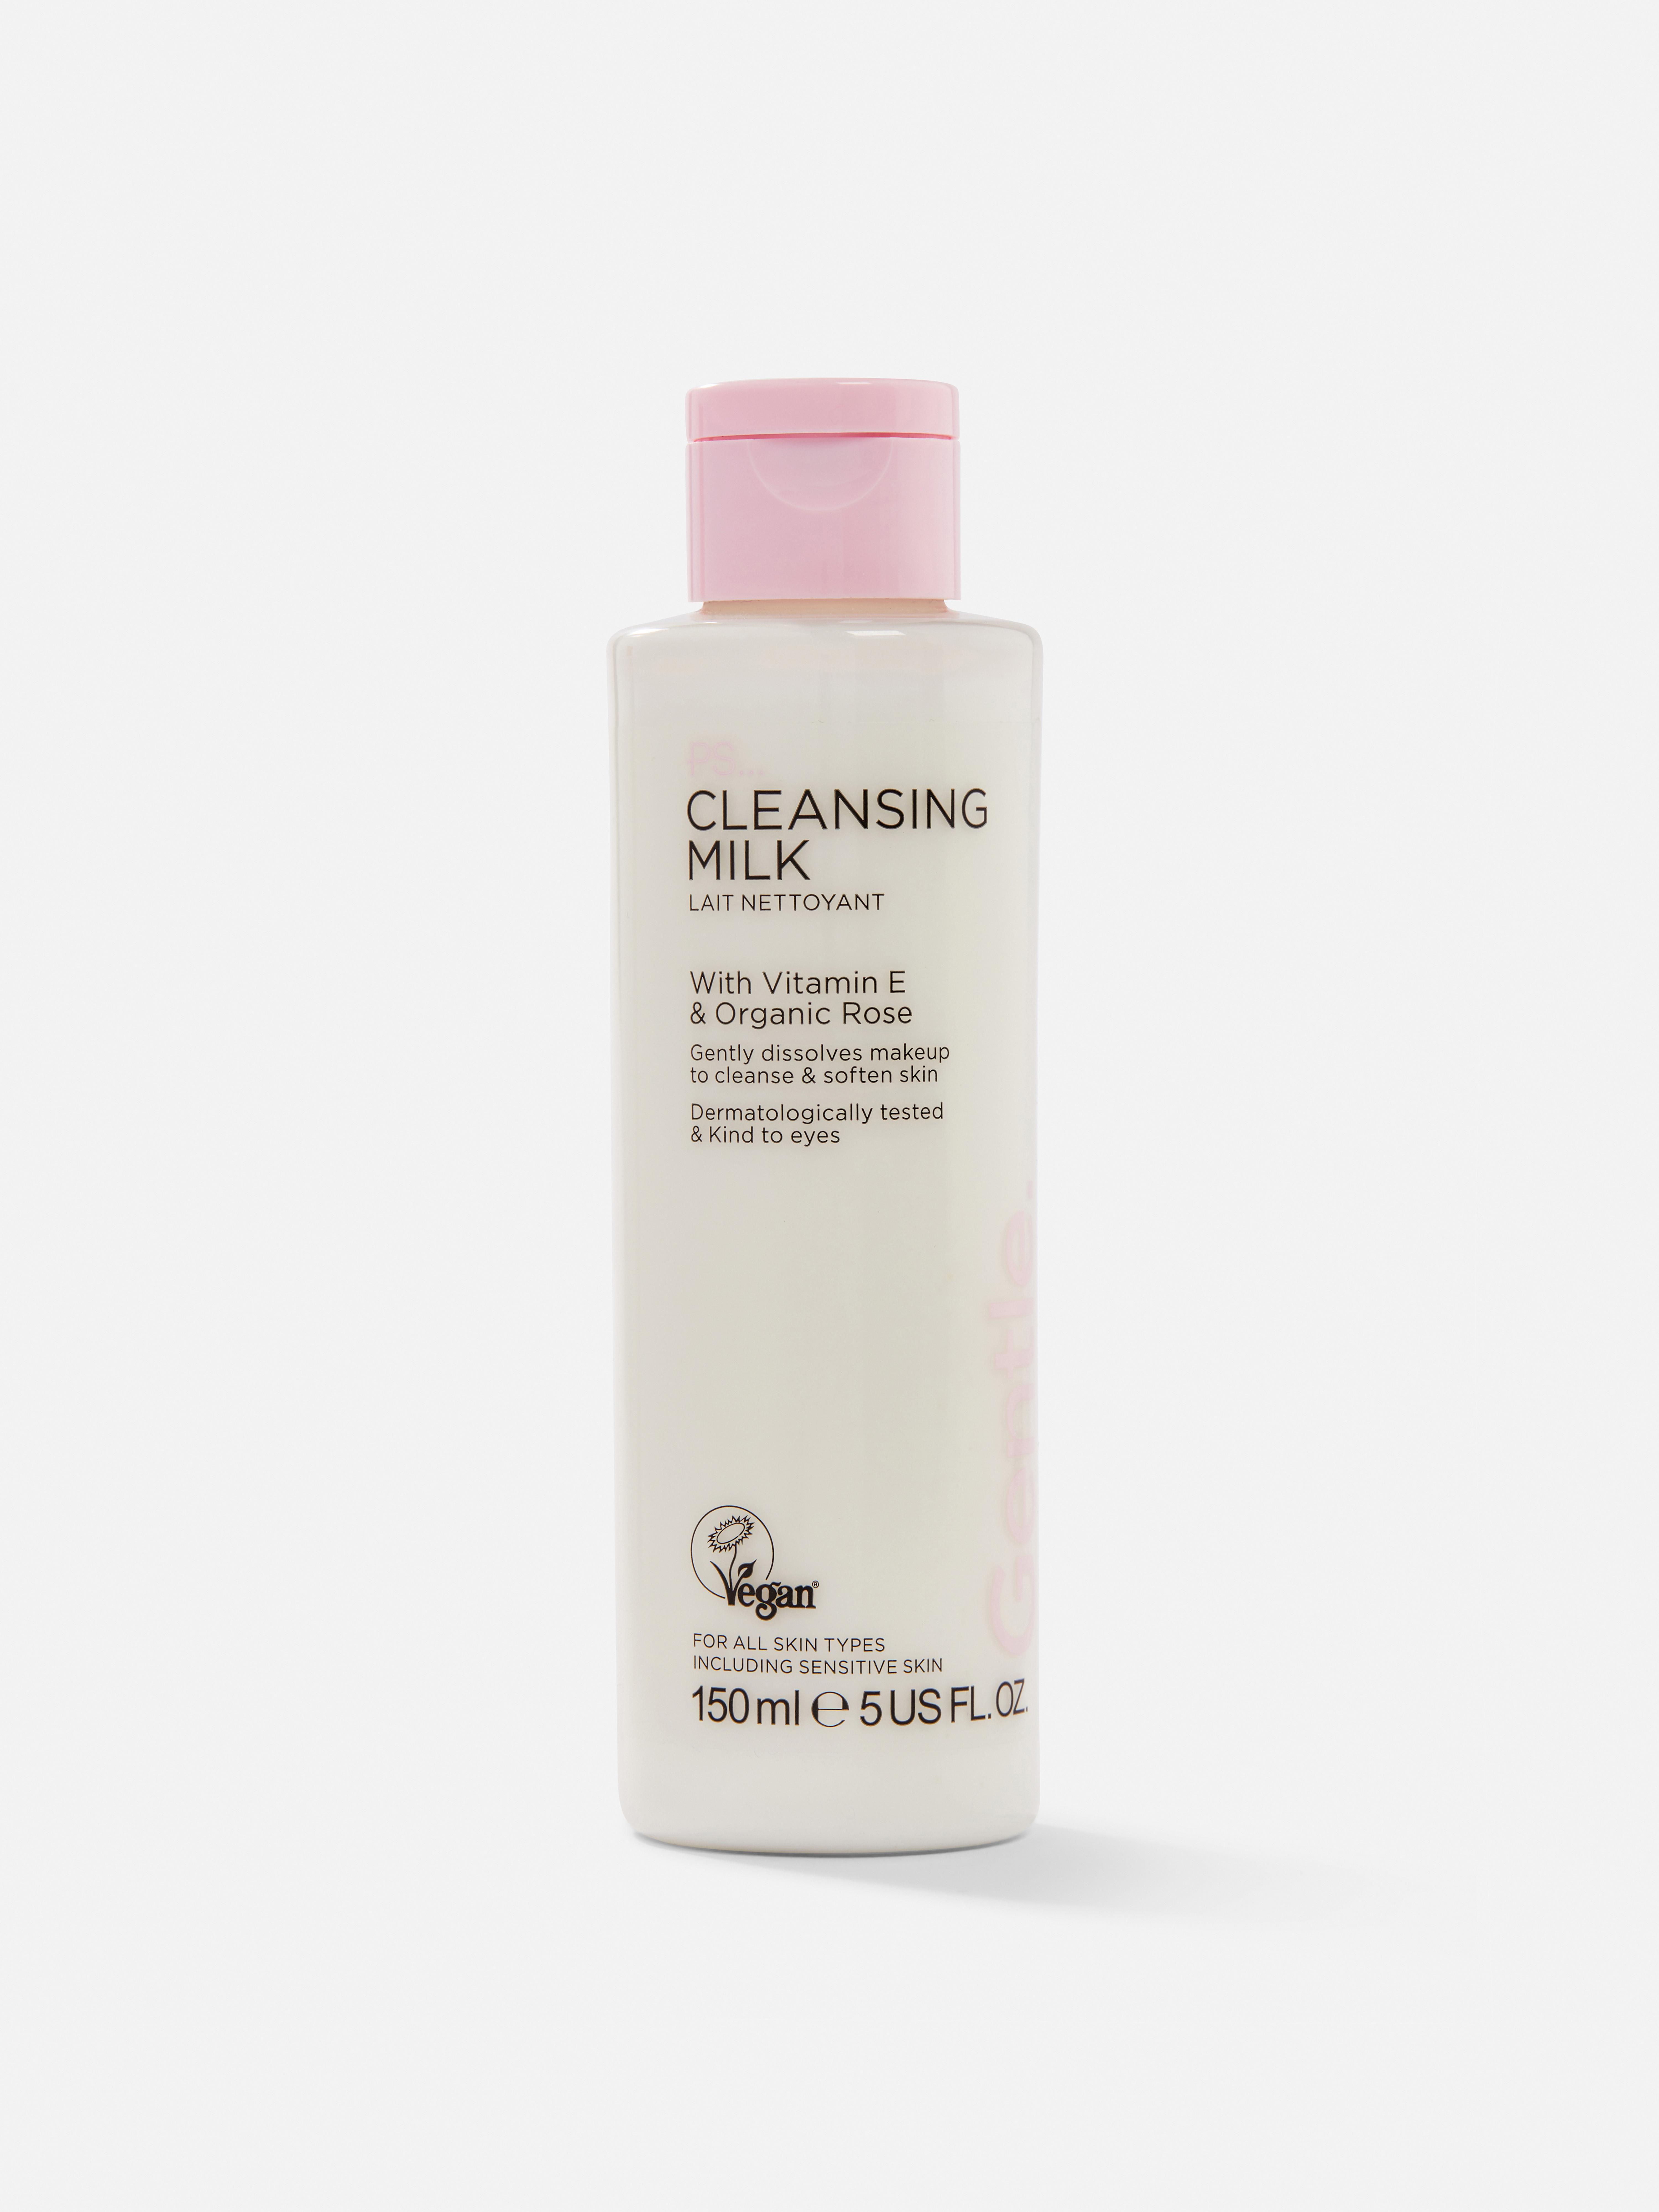 PS Cleansing Milk